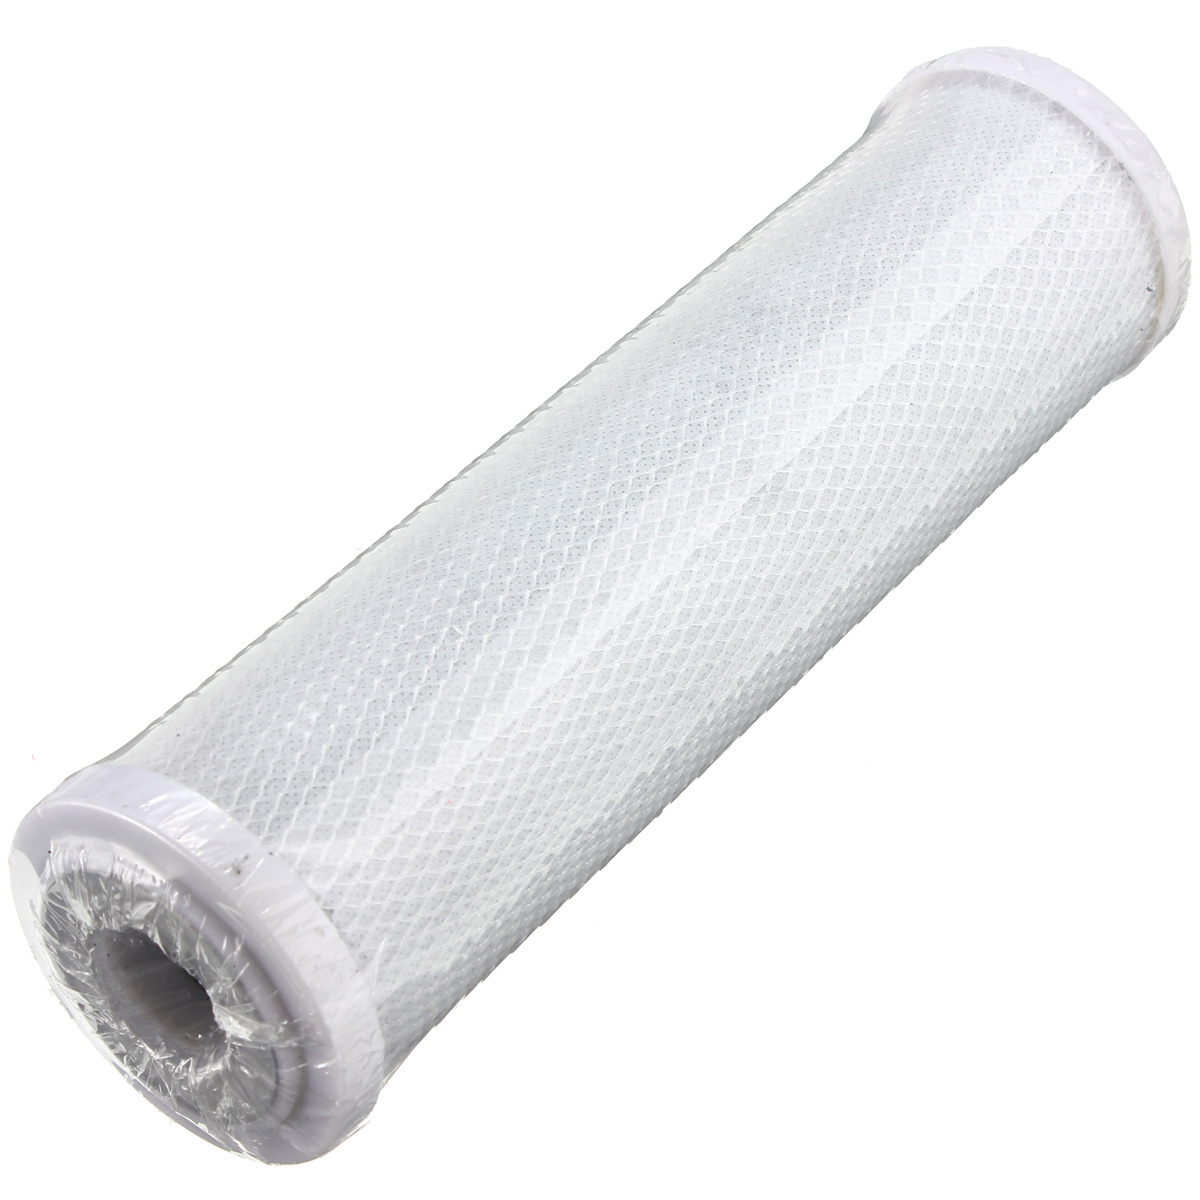 Replacement-Activated-Carbon-Water-10-Inch-Filter-Whole-House-RO-CTO-5-Micron-1014779